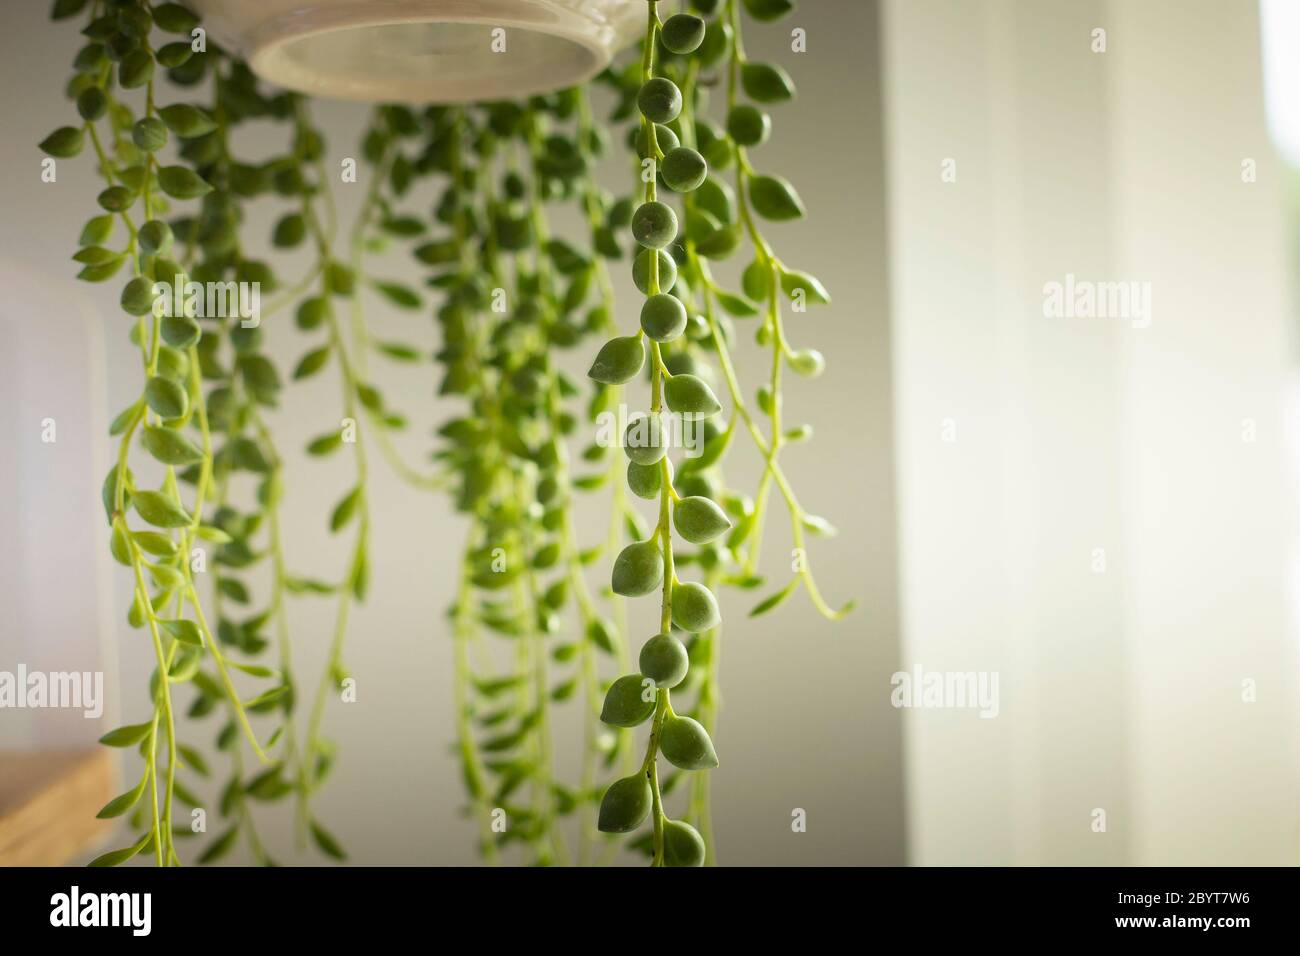 Senecio rowleyanus house Plant leaves detail. String of Pearls rounded leaves plant close up. Copy space. Vertical shot. Stock Photo